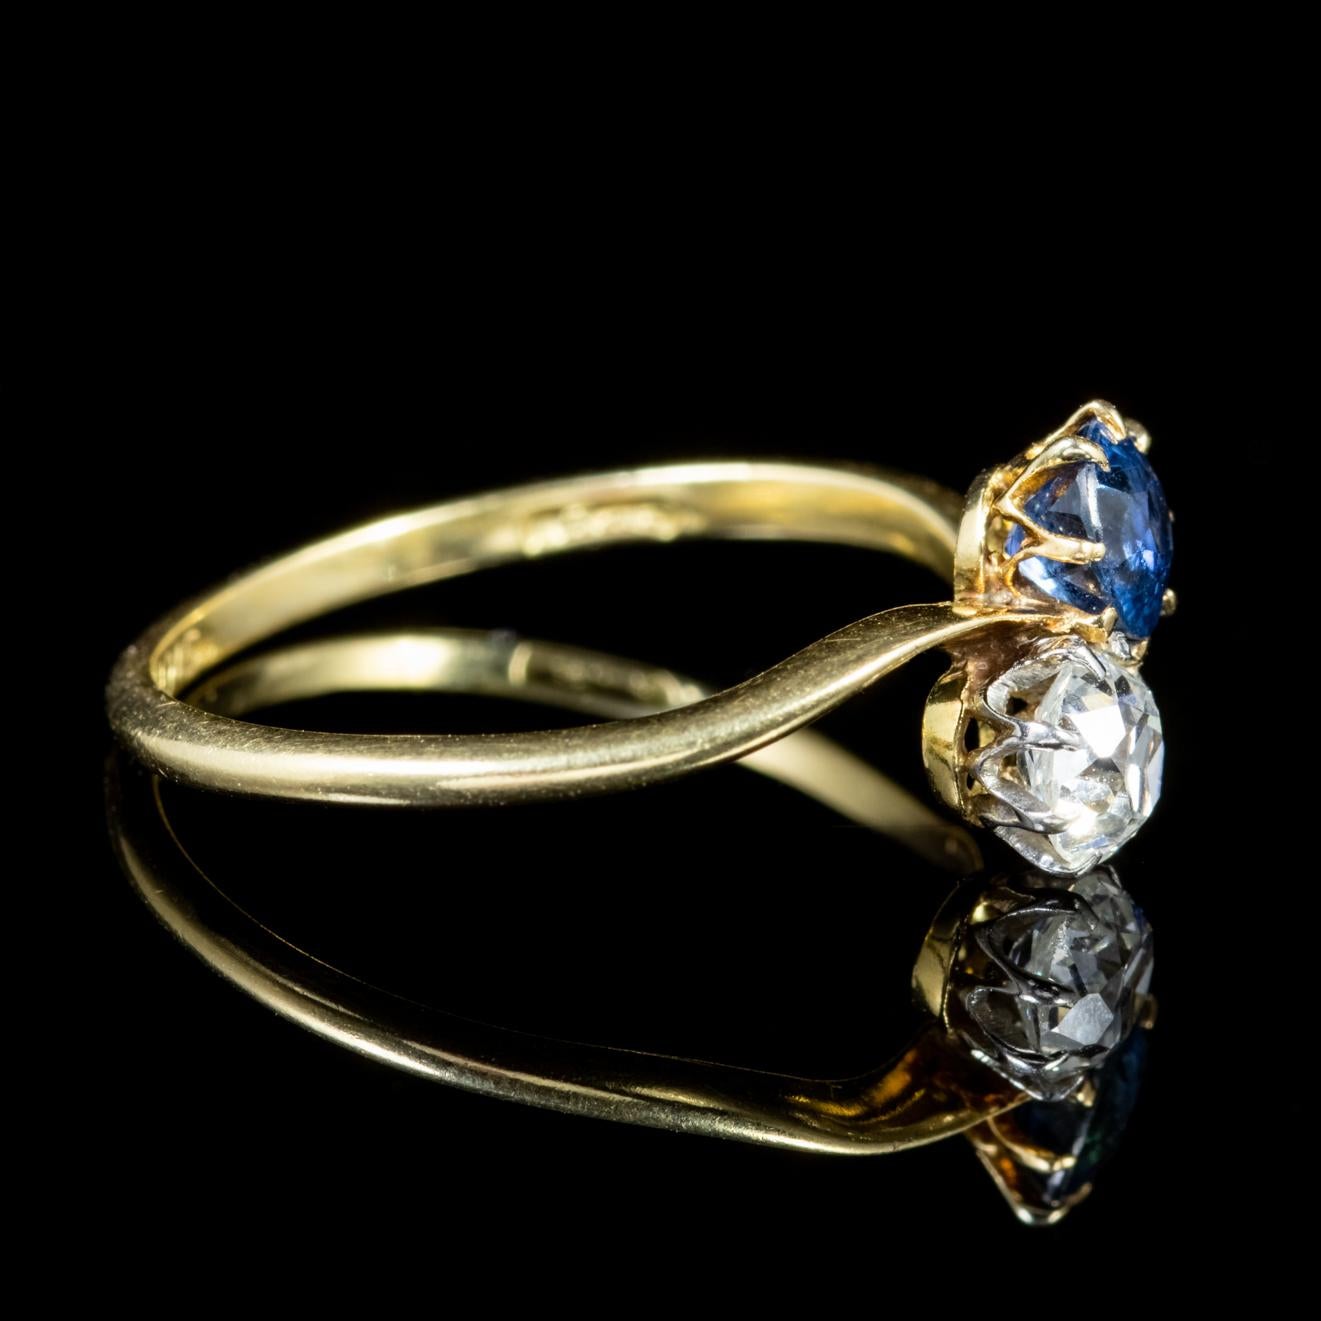 An elegant antique Edwardian ring crowned with a 0.23ct blue Sapphire and complemented by a 0.20ct old cushion cut Diamond. 

The deep royal blue of the Sapphire has been a favourite of kings and royalty throughout history and famously adorned both